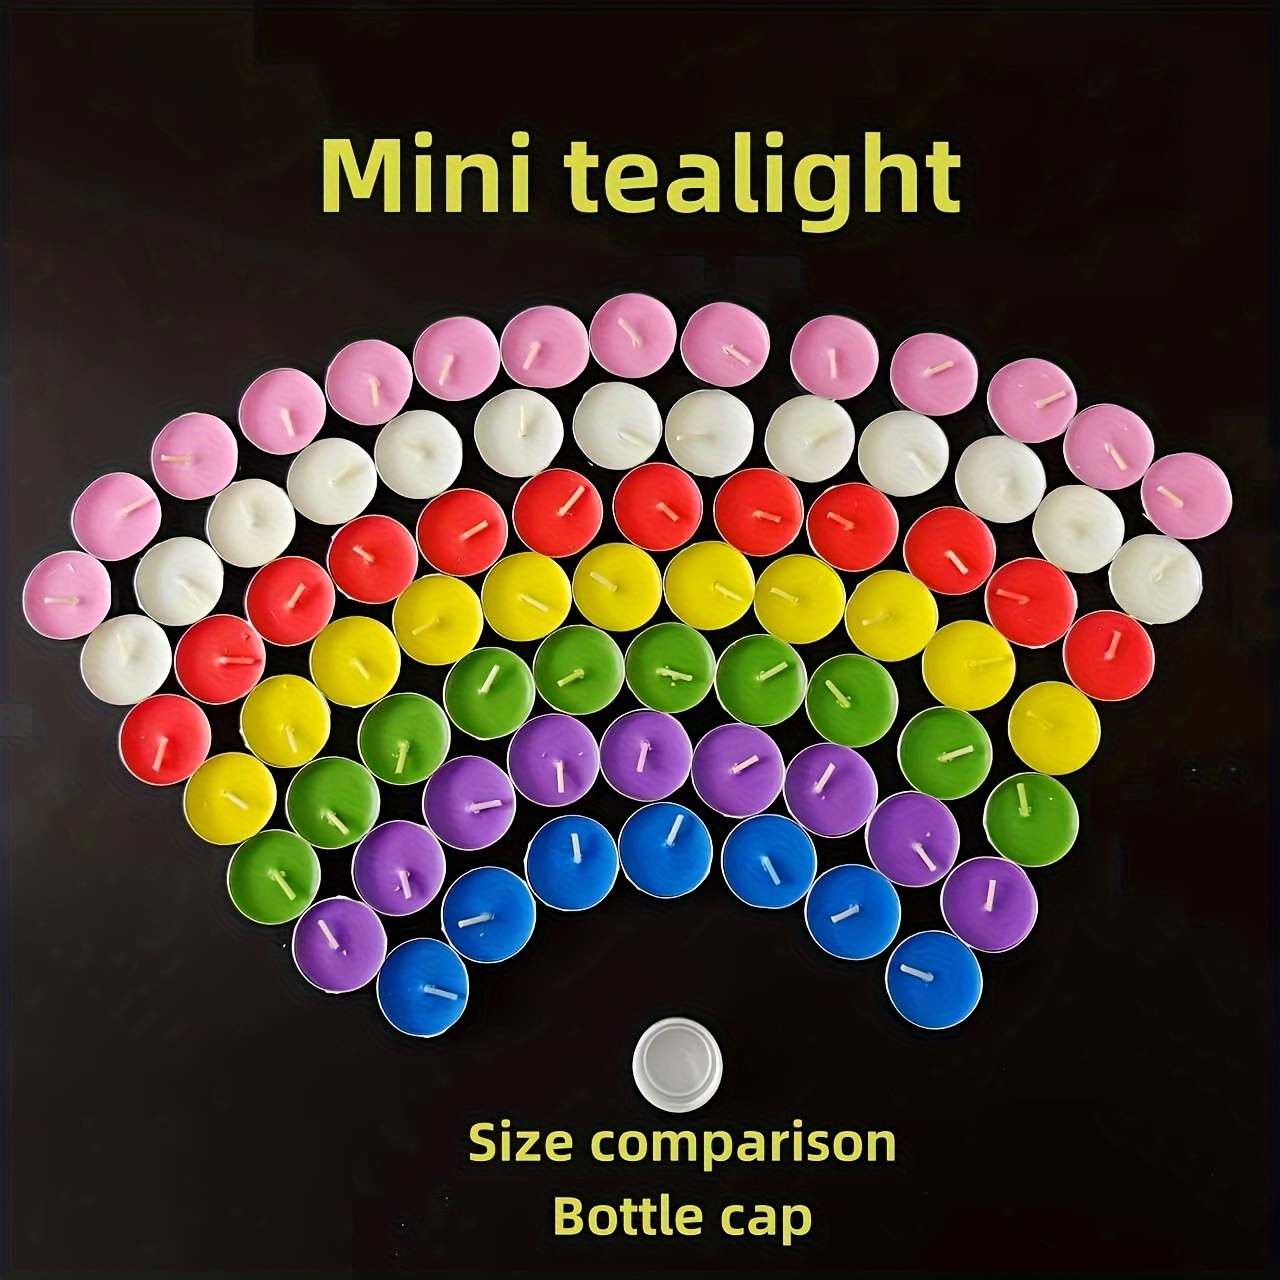 

50pcs Romantic Tealight Candles - Unscented, Dripless & Long-lasting Smokeless Mini Lights For Mood Enhancement, Home Decor, Weddings, Crafts & More Candle Lighter Lighter For Candles